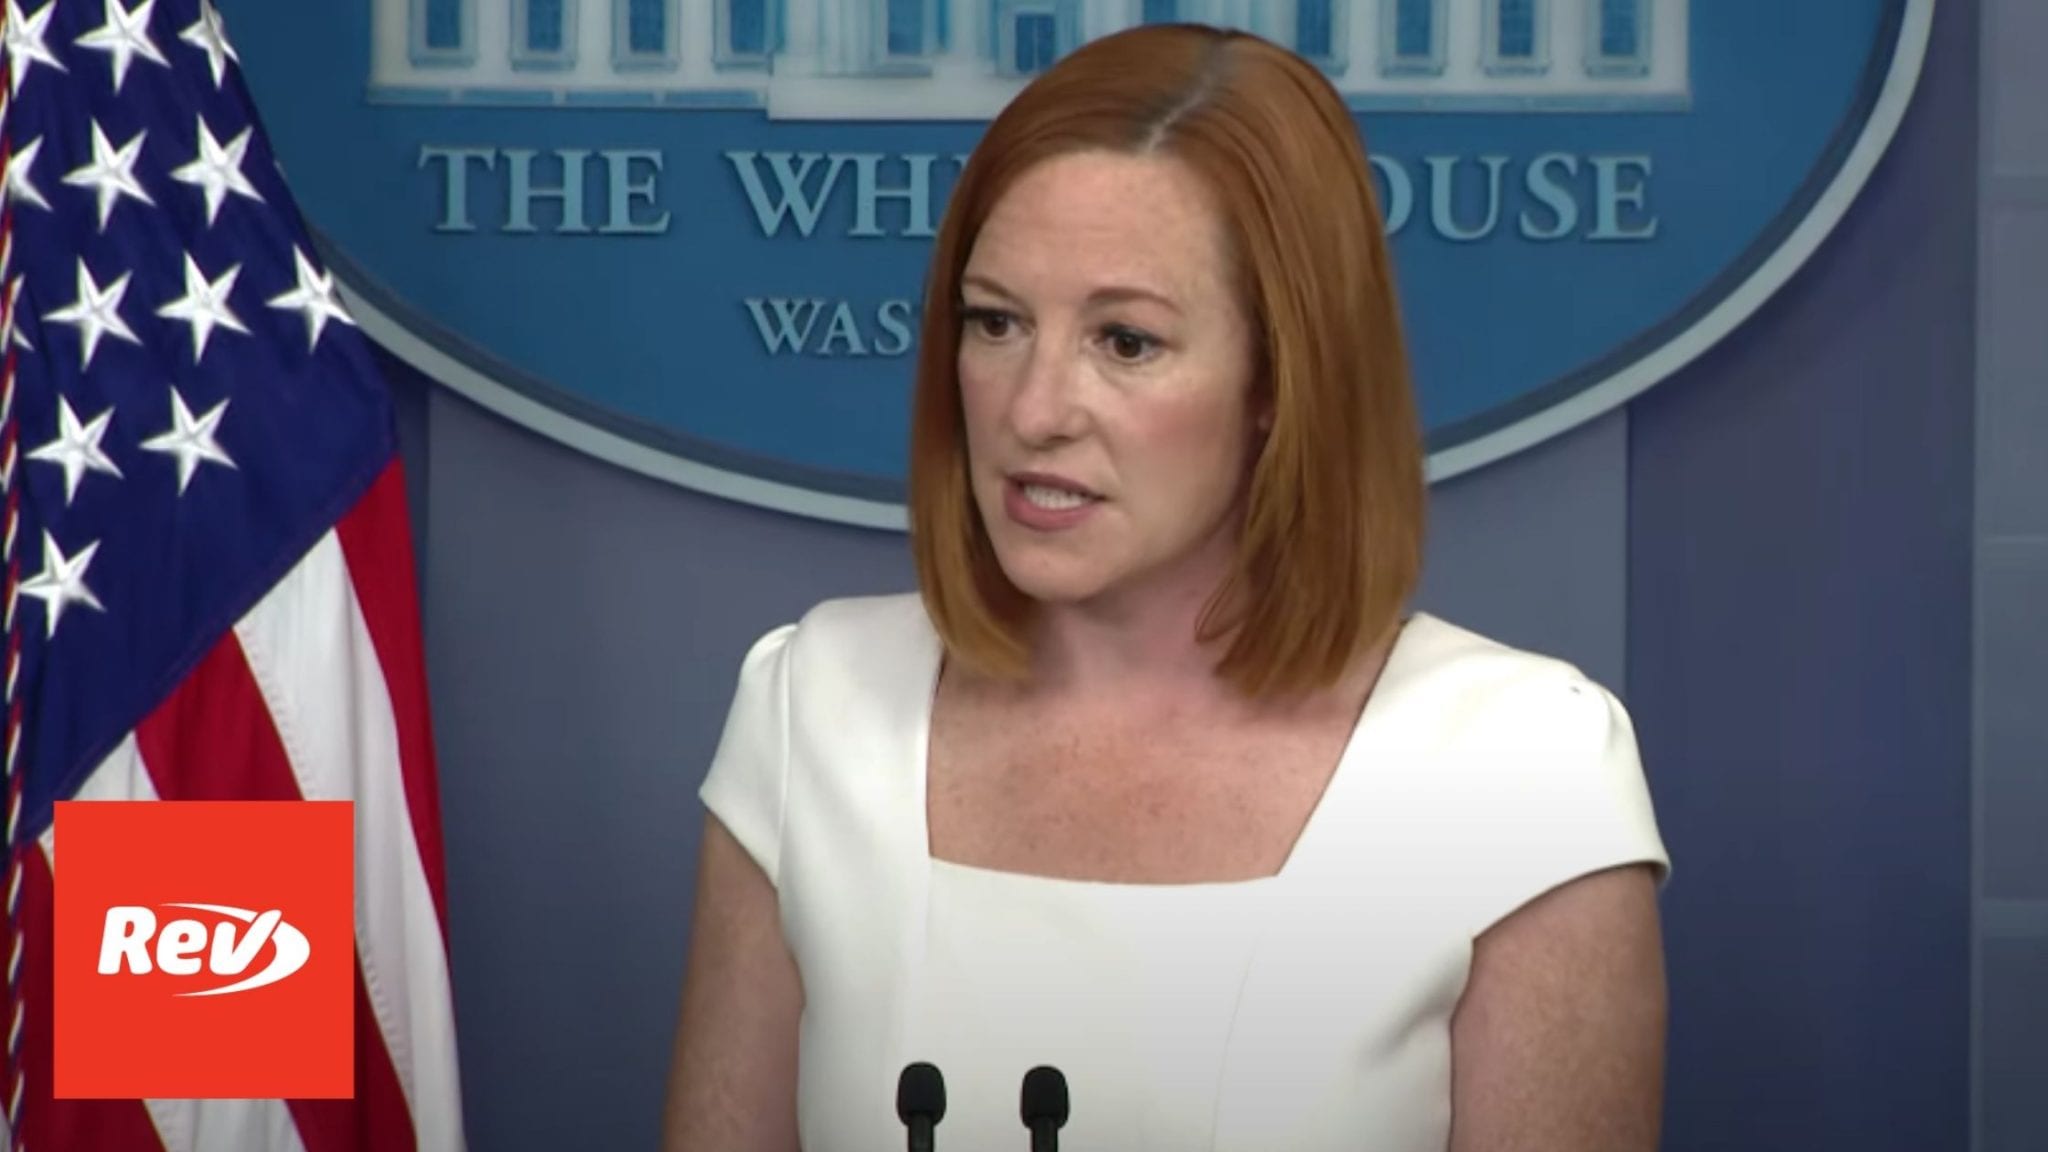 Biden administration not mandating COVID vaccines for White House staff, Psaki says